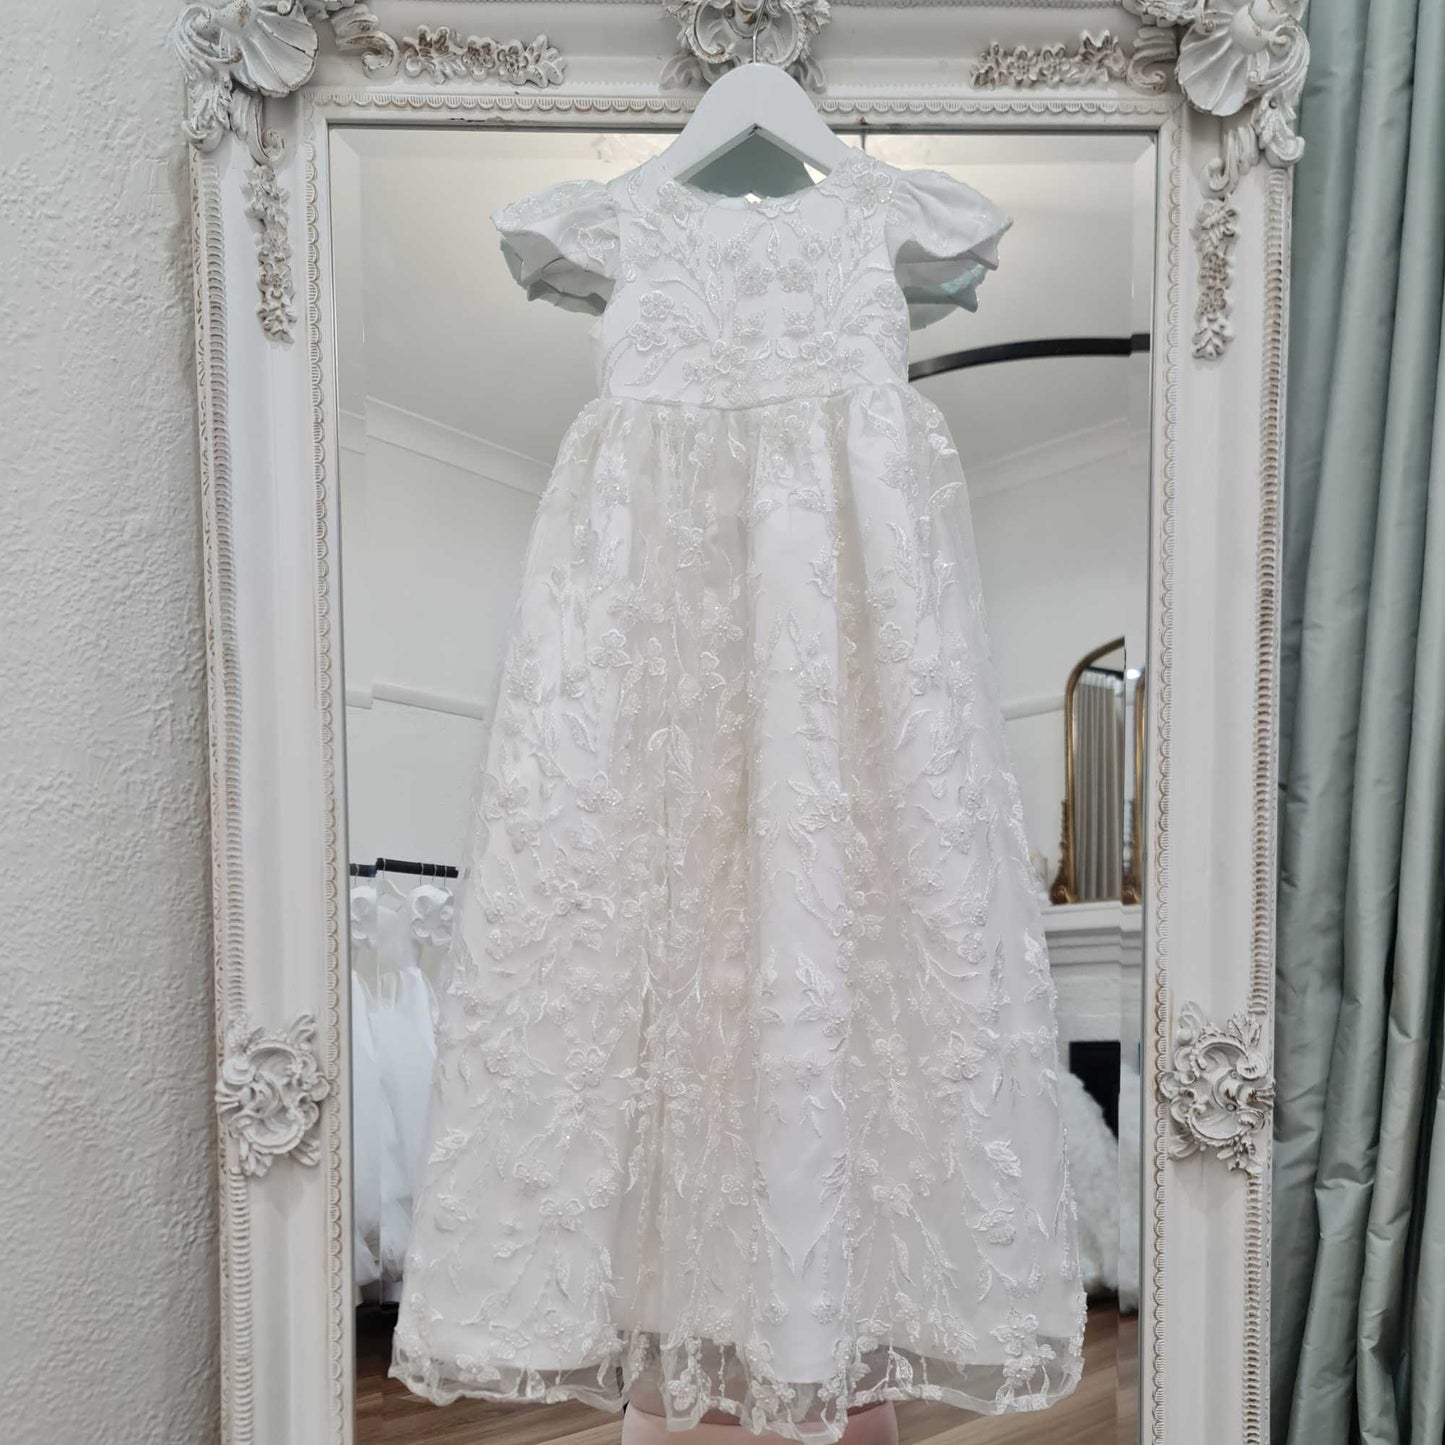 Elene Couture Christening gown - Set comes with headband, bib and shoe |  Caremour